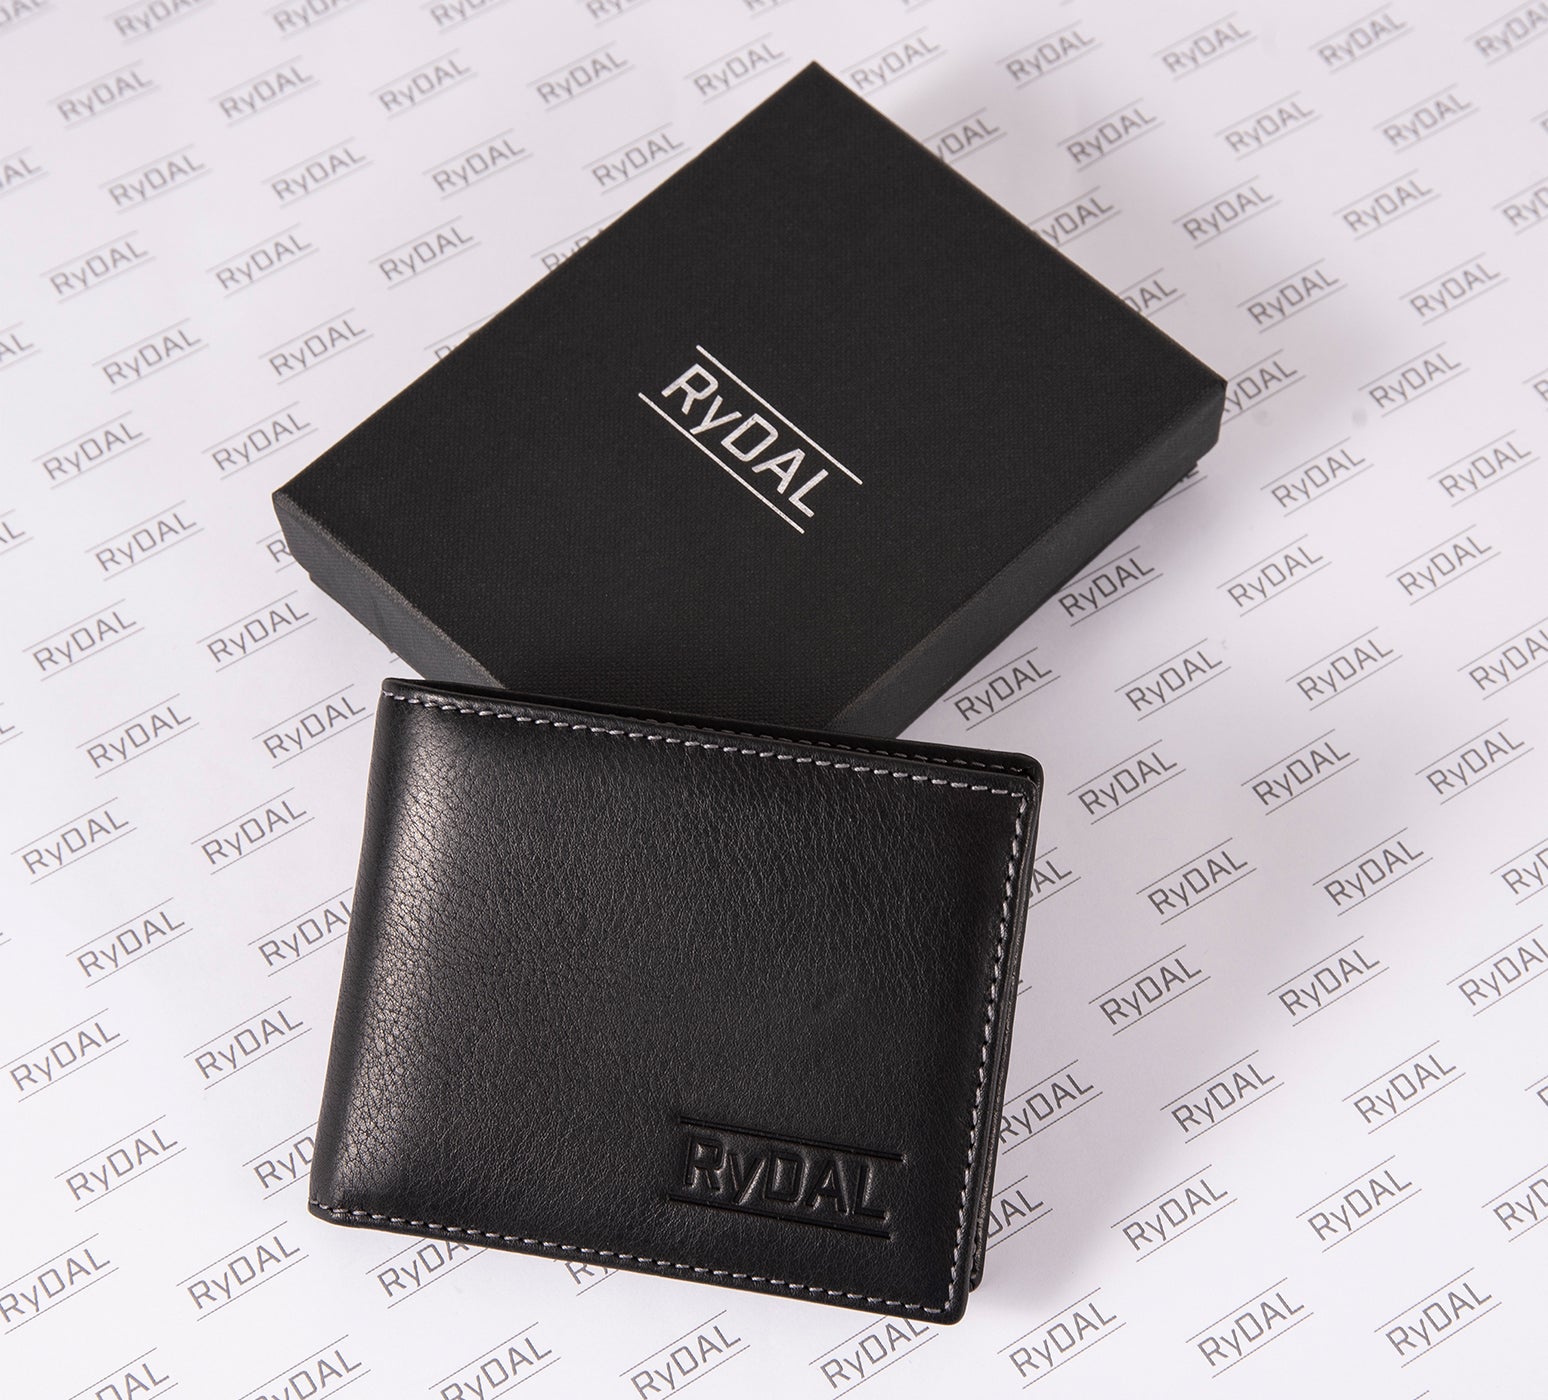 Mens Leather Wallet with Coin Pocket from Rydal in 'Black' with Giftbox.